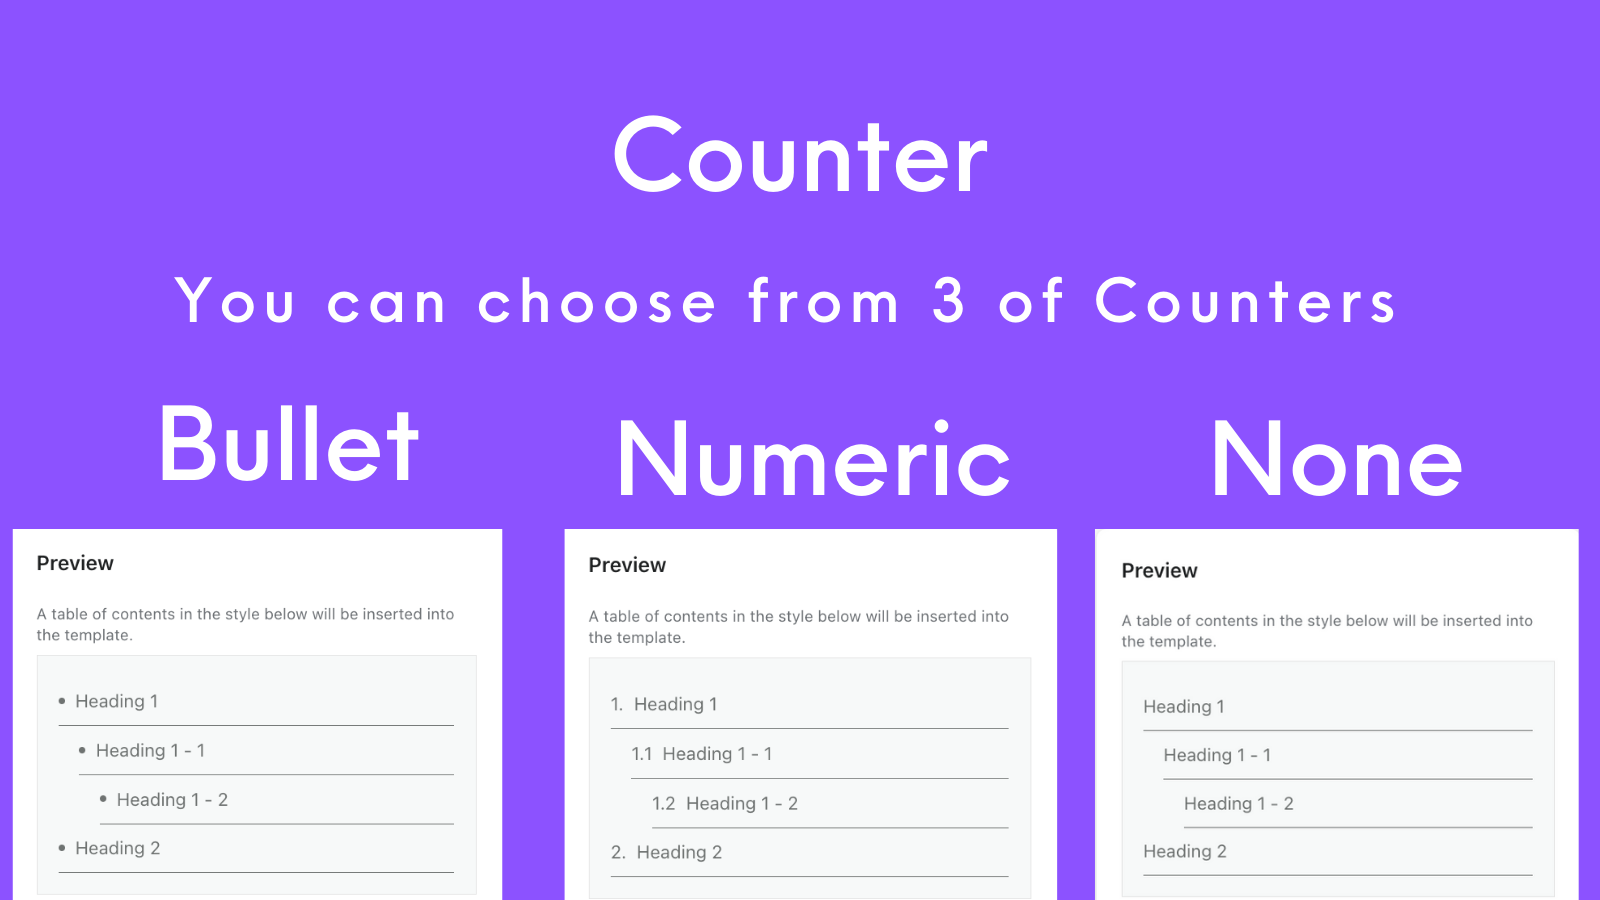 You can choose from 3 of counters.